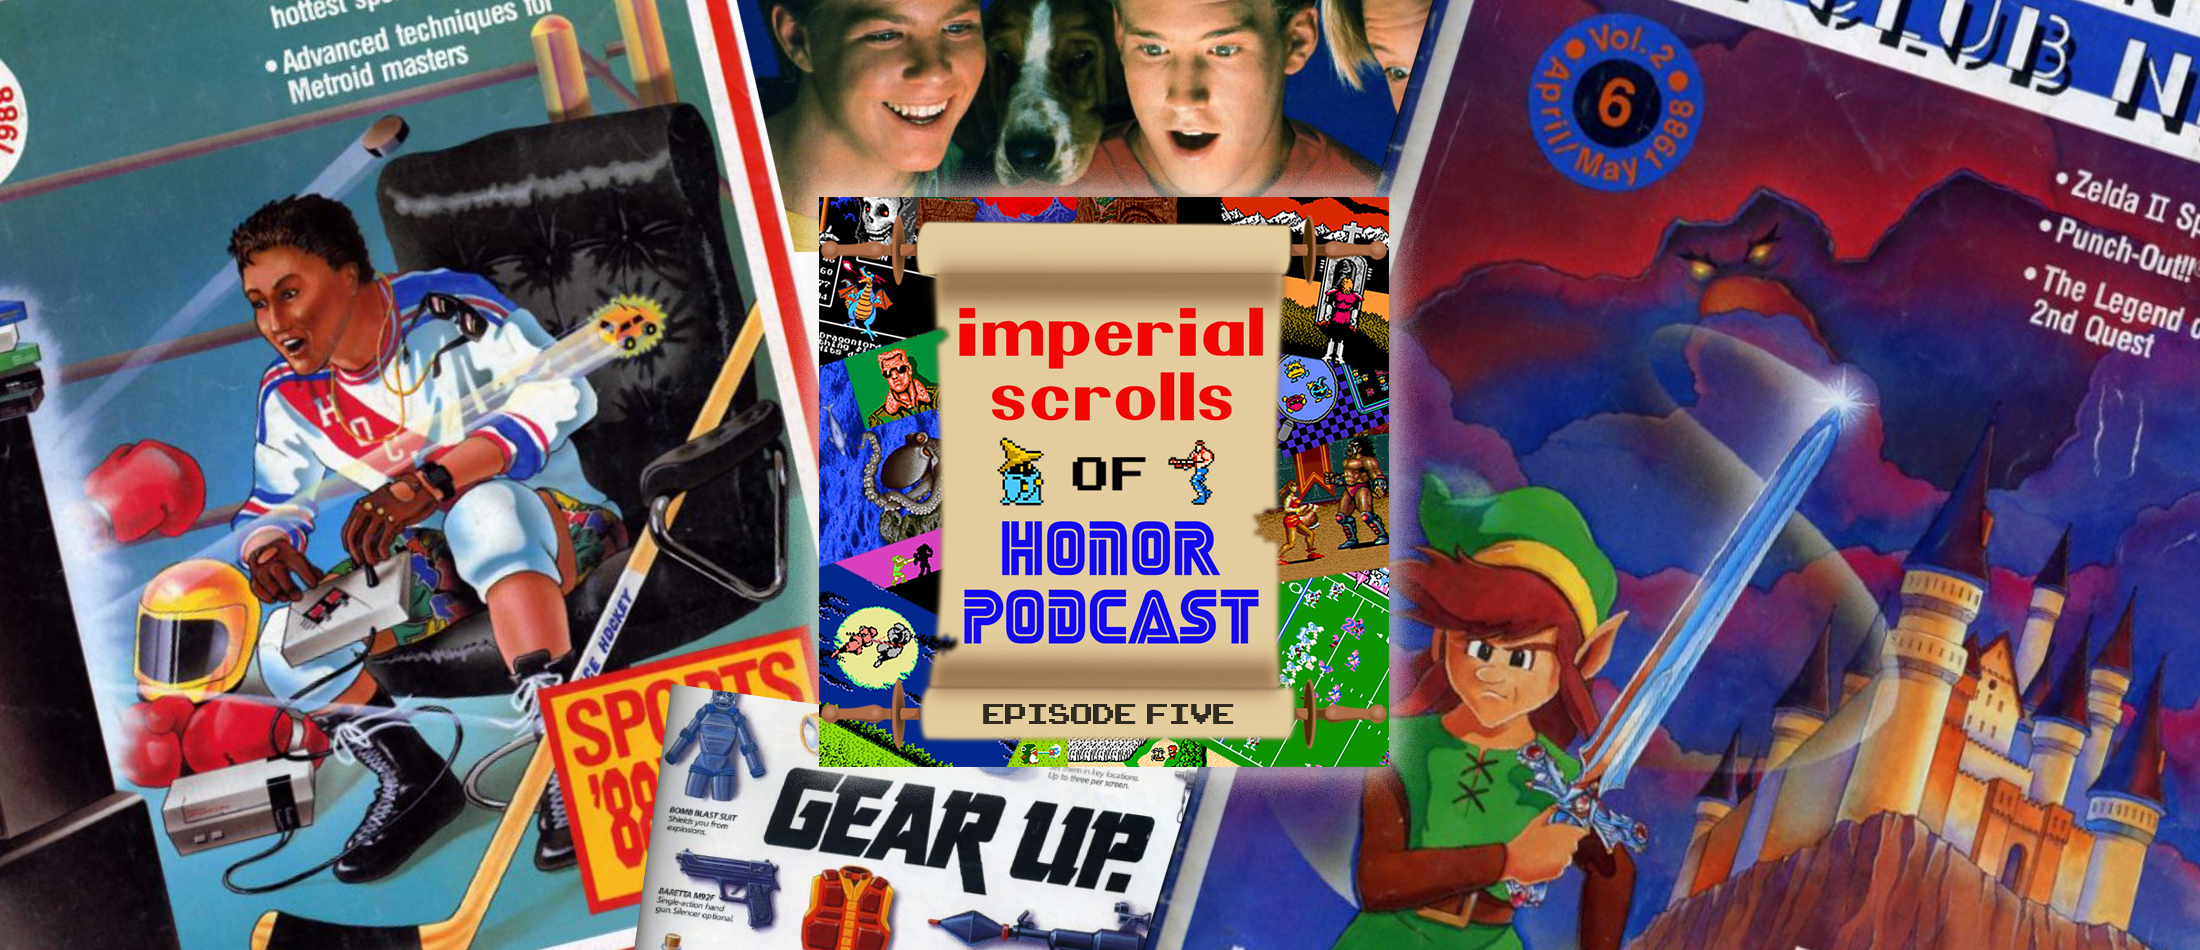 Imperial Scrolls of Honor Podcast - Episode 5 - Nintendo Fun Club News #6-7